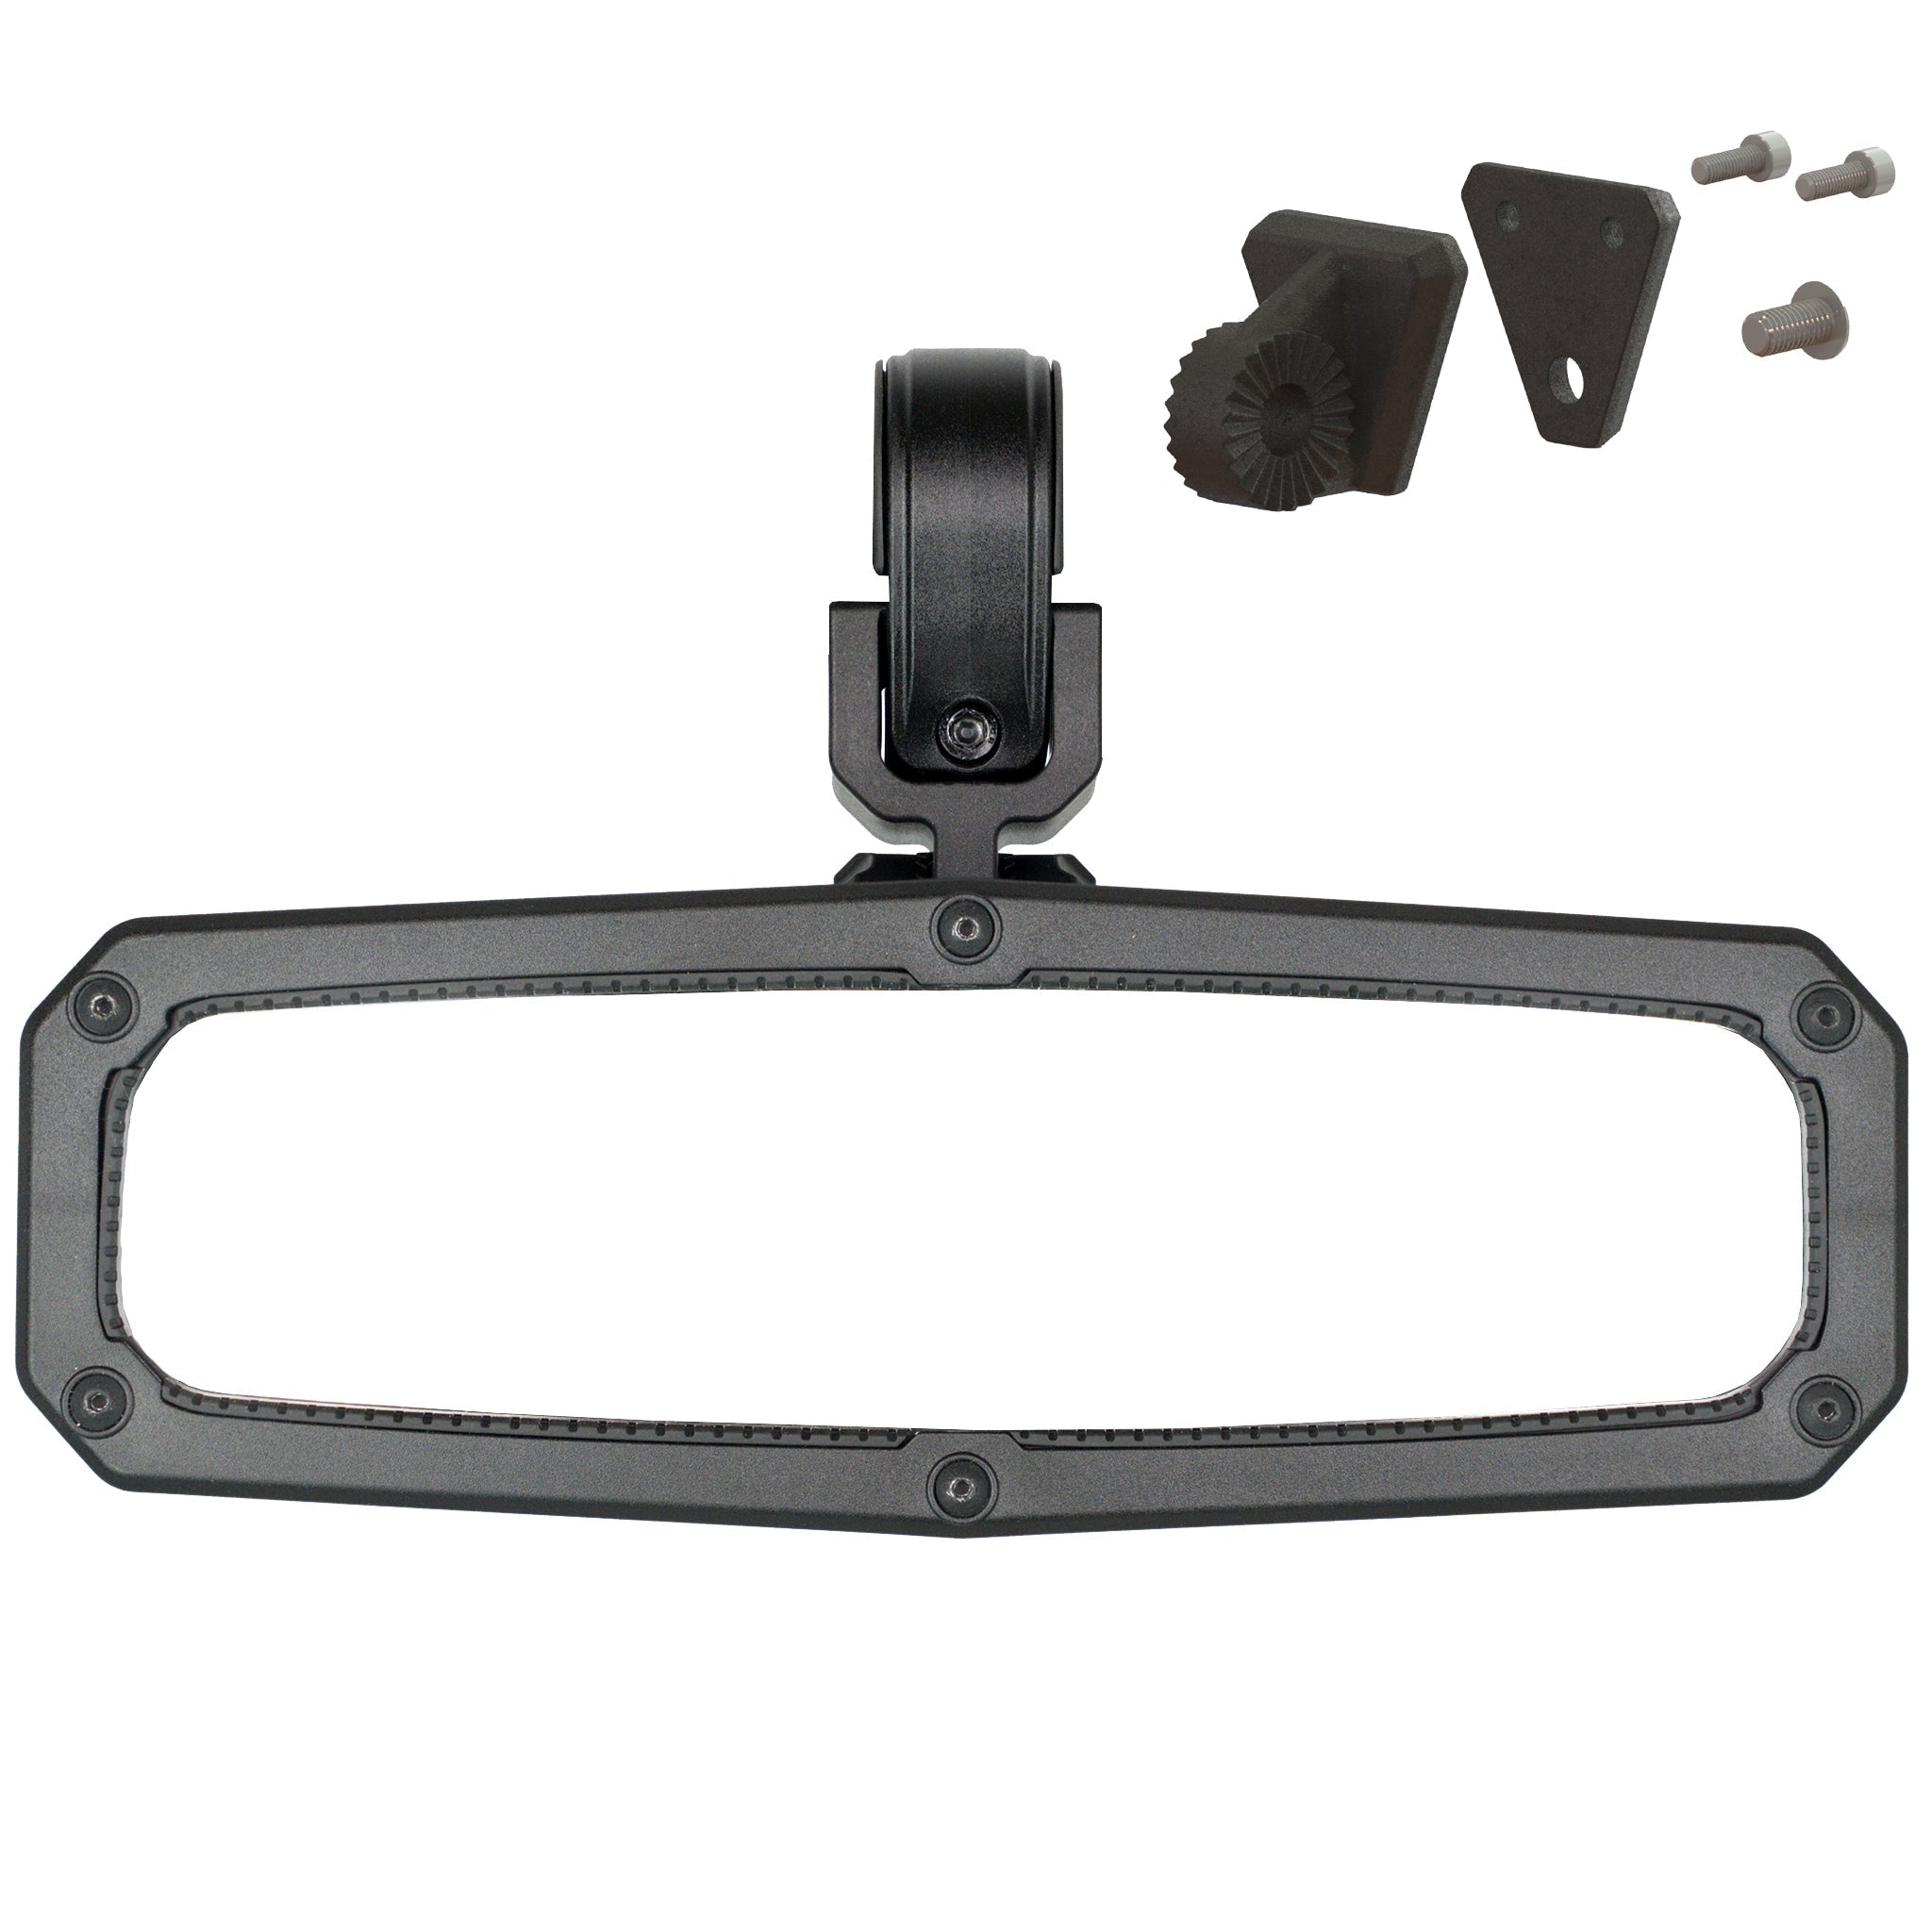 CLEARVIEW™ UTV REARVIEW MIRROR V2 - CAN AM TRIANGLE TAB MOUNT